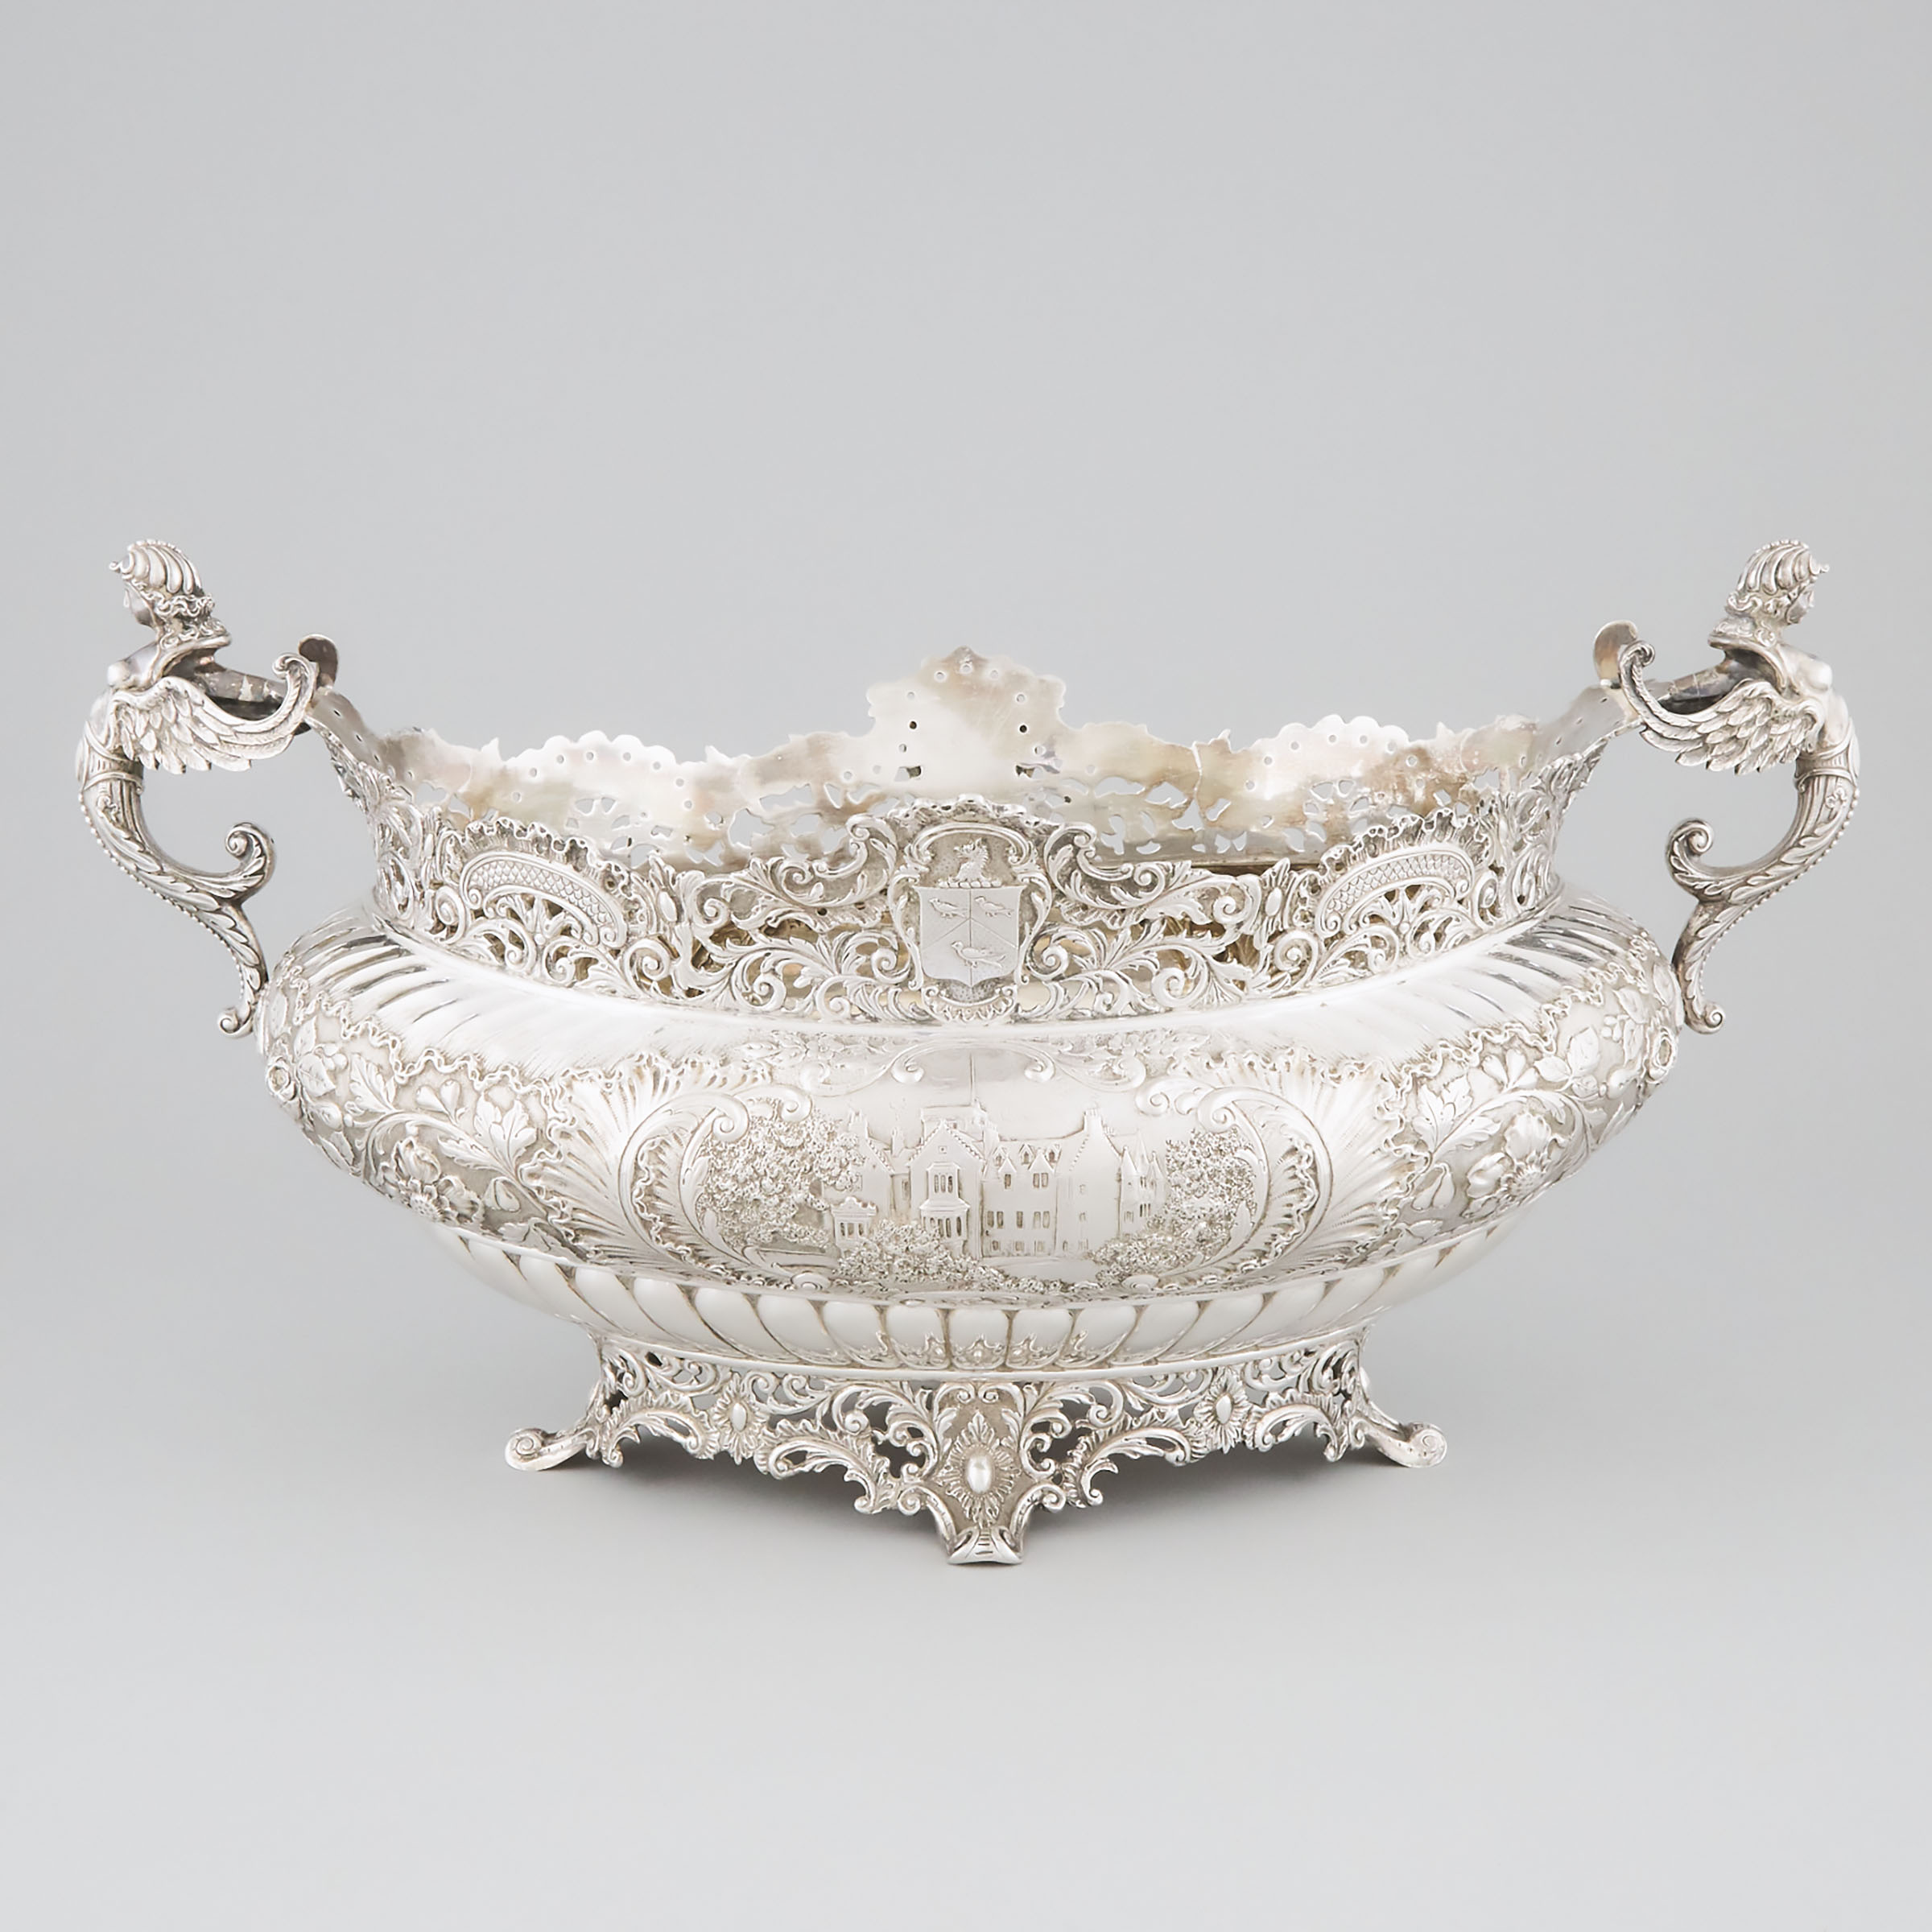 Late Victorian Scottish Silver Two-Handled Oval Centrepiece, George Edward & Sons, Glasgow, 1897